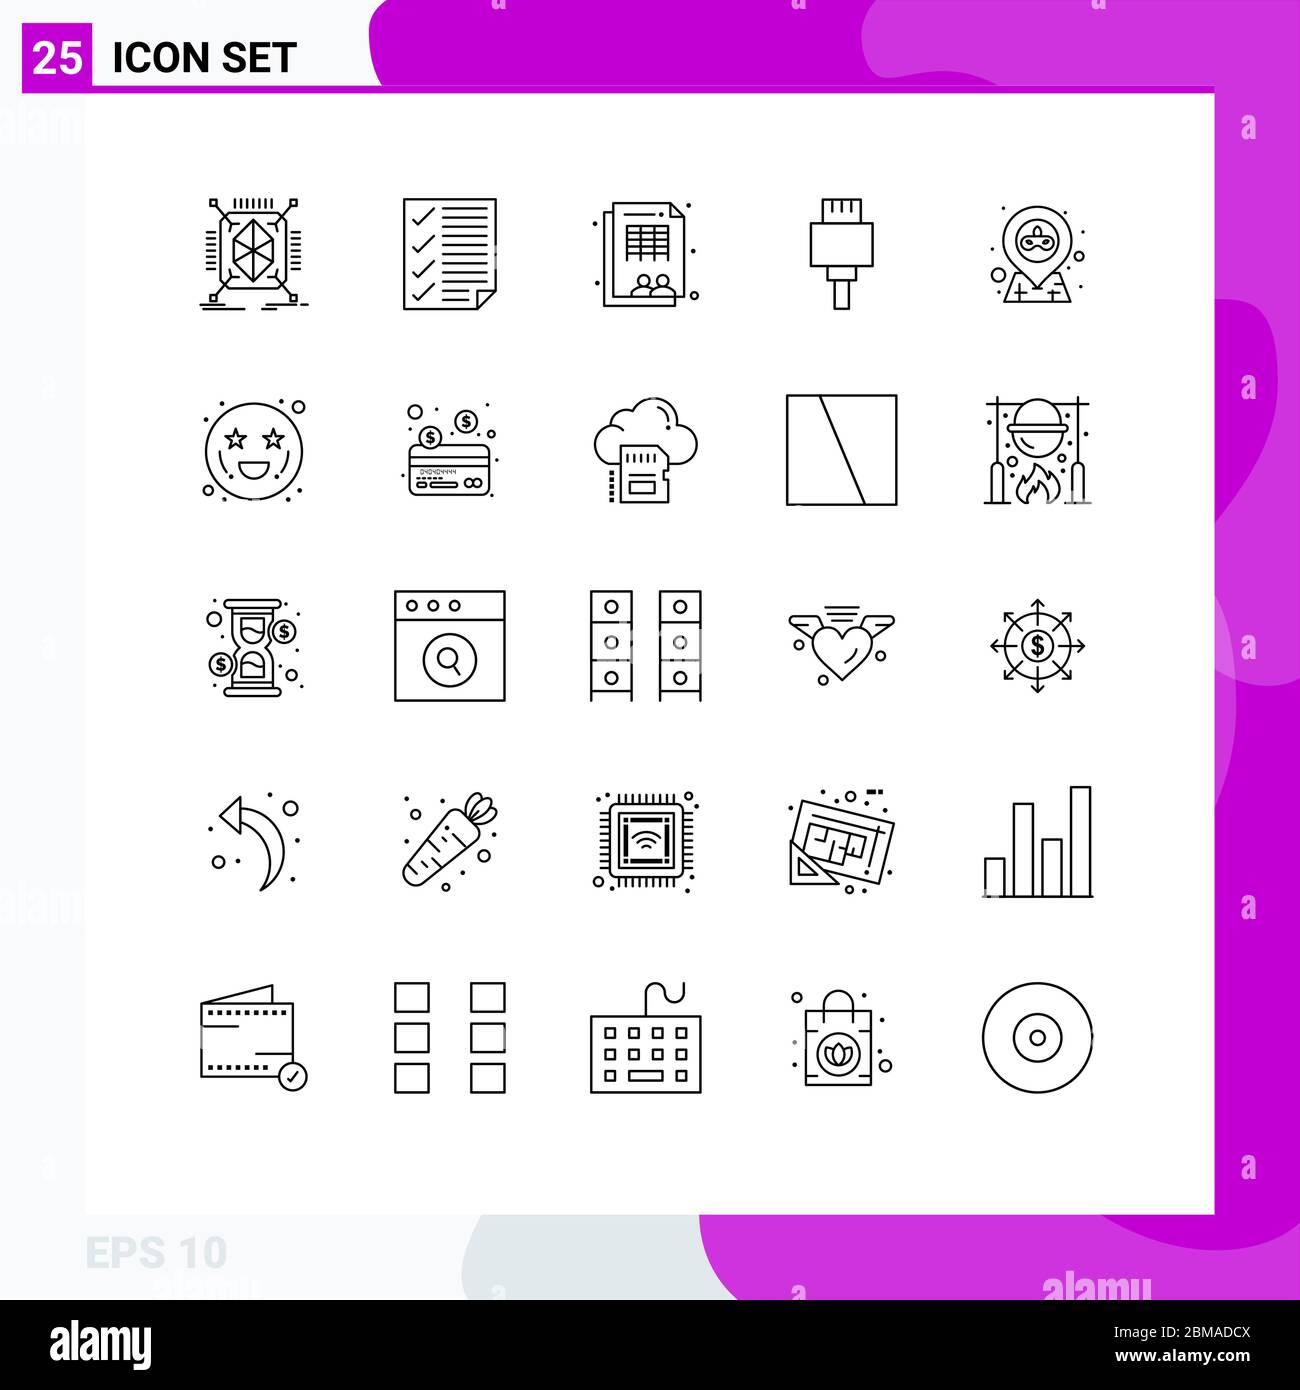 Mobile Interface Line Set of 25 Pictograms of map, electronic, report, devices, workforce Editable Vector Design Elements Stock Vector